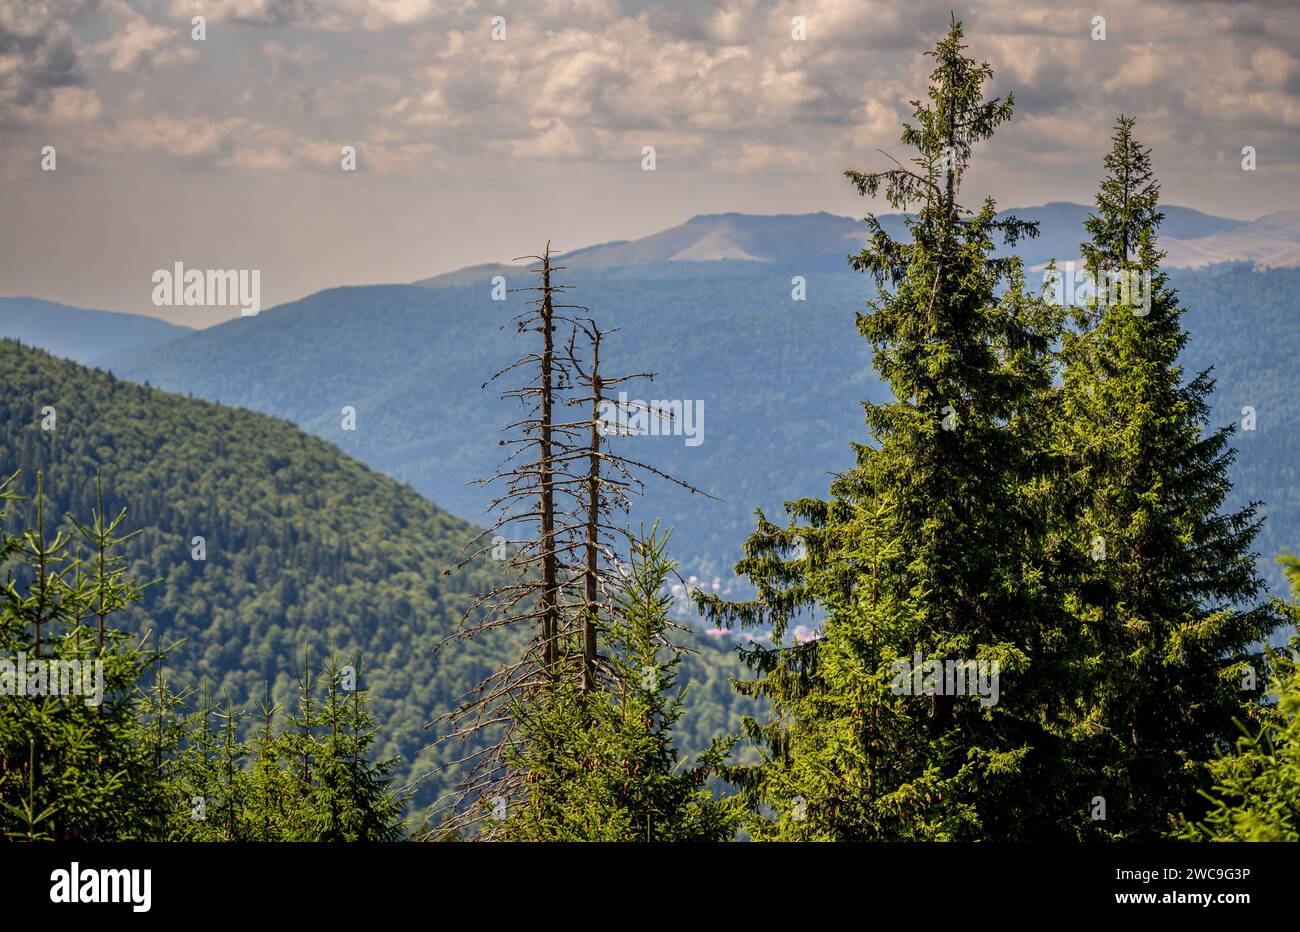 A scenic view of pine trees adorning the slopes of a majestic mountain. Stock Photo